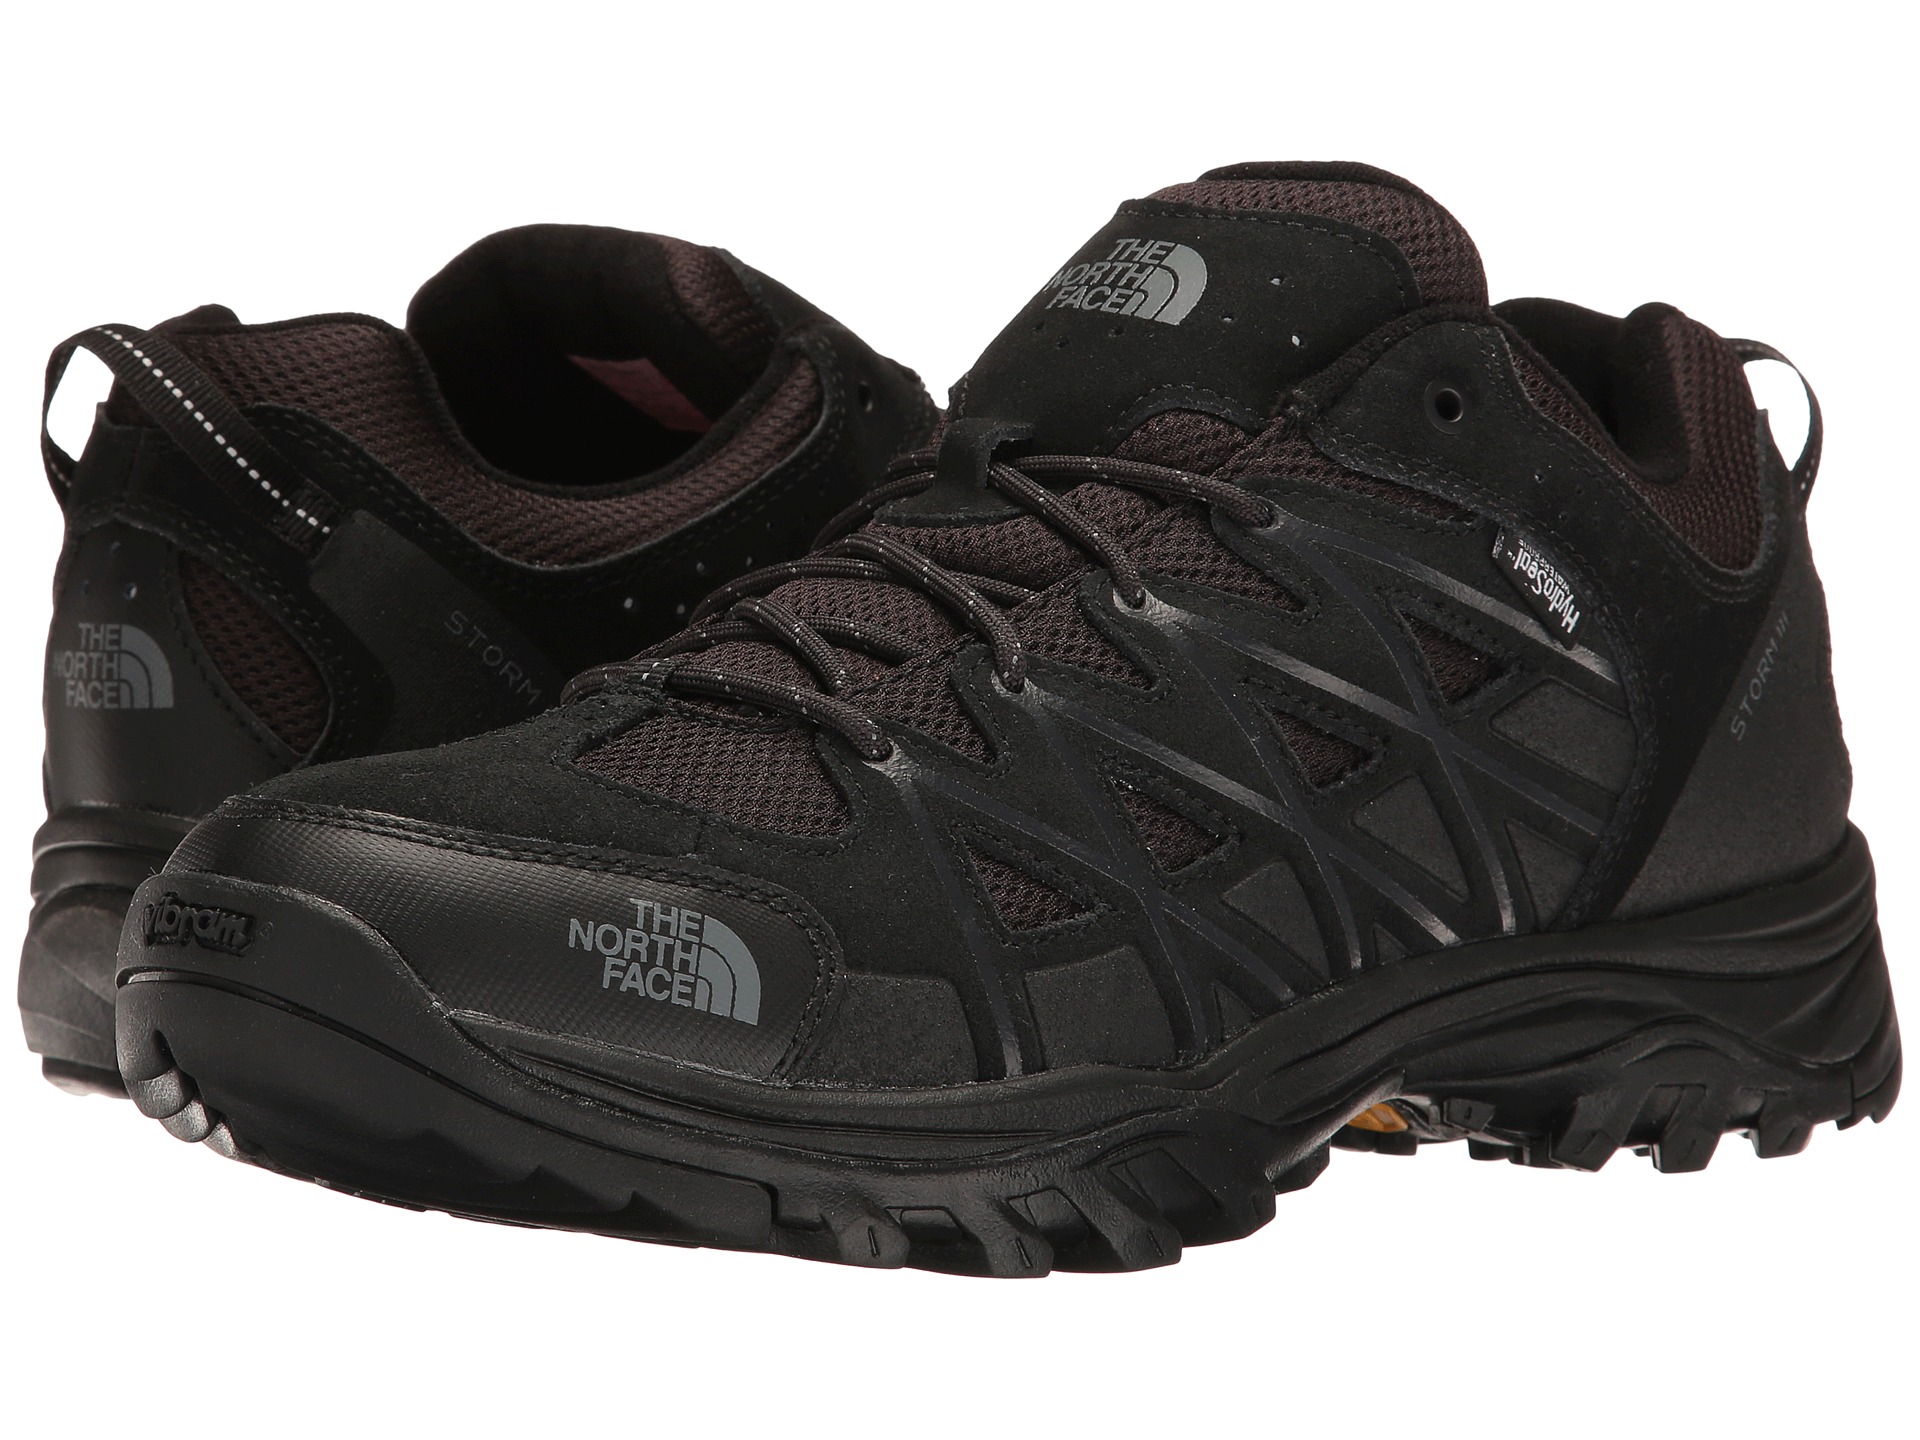 The North Face Storm III WP - Zappos.com Free Shipping BOTH Ways